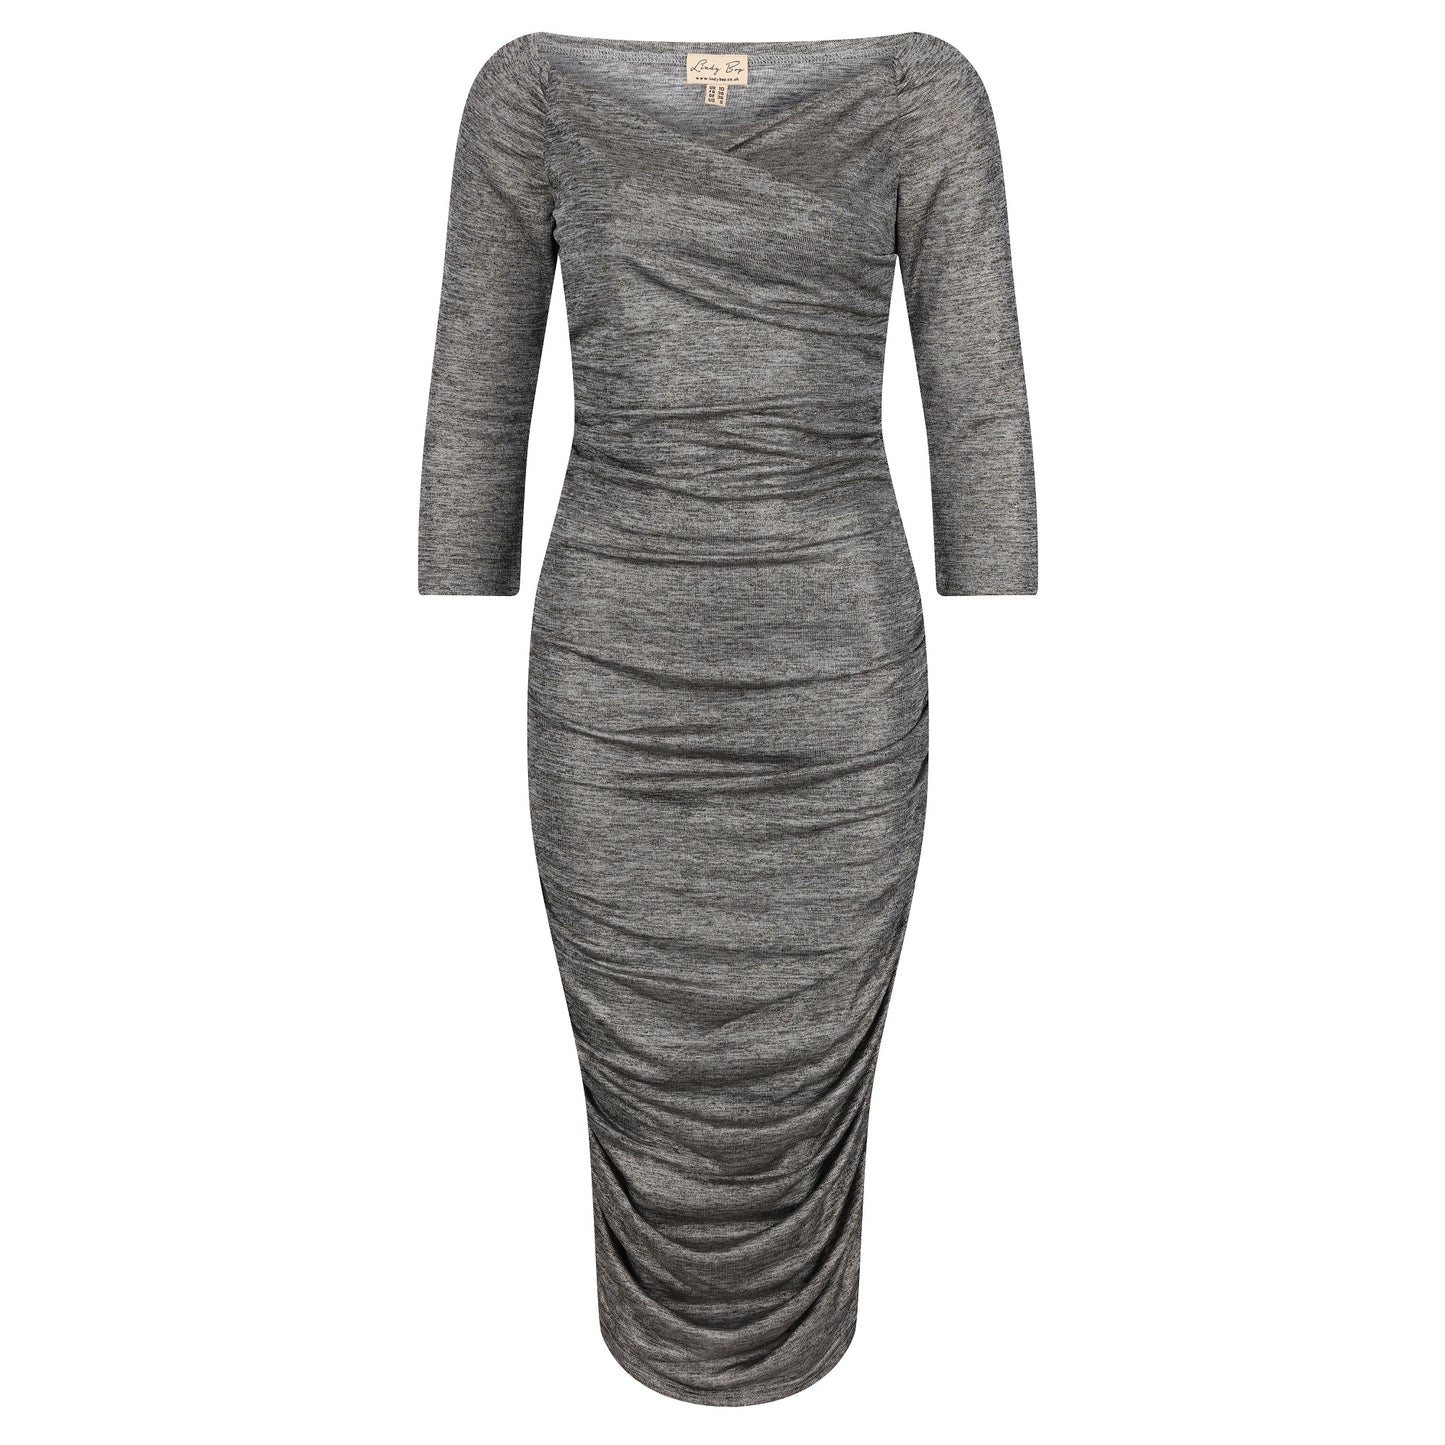 Lindy Bop 'Constance' Metallic Ruched 3/4 Sleeve Wiggle Pencil Dress